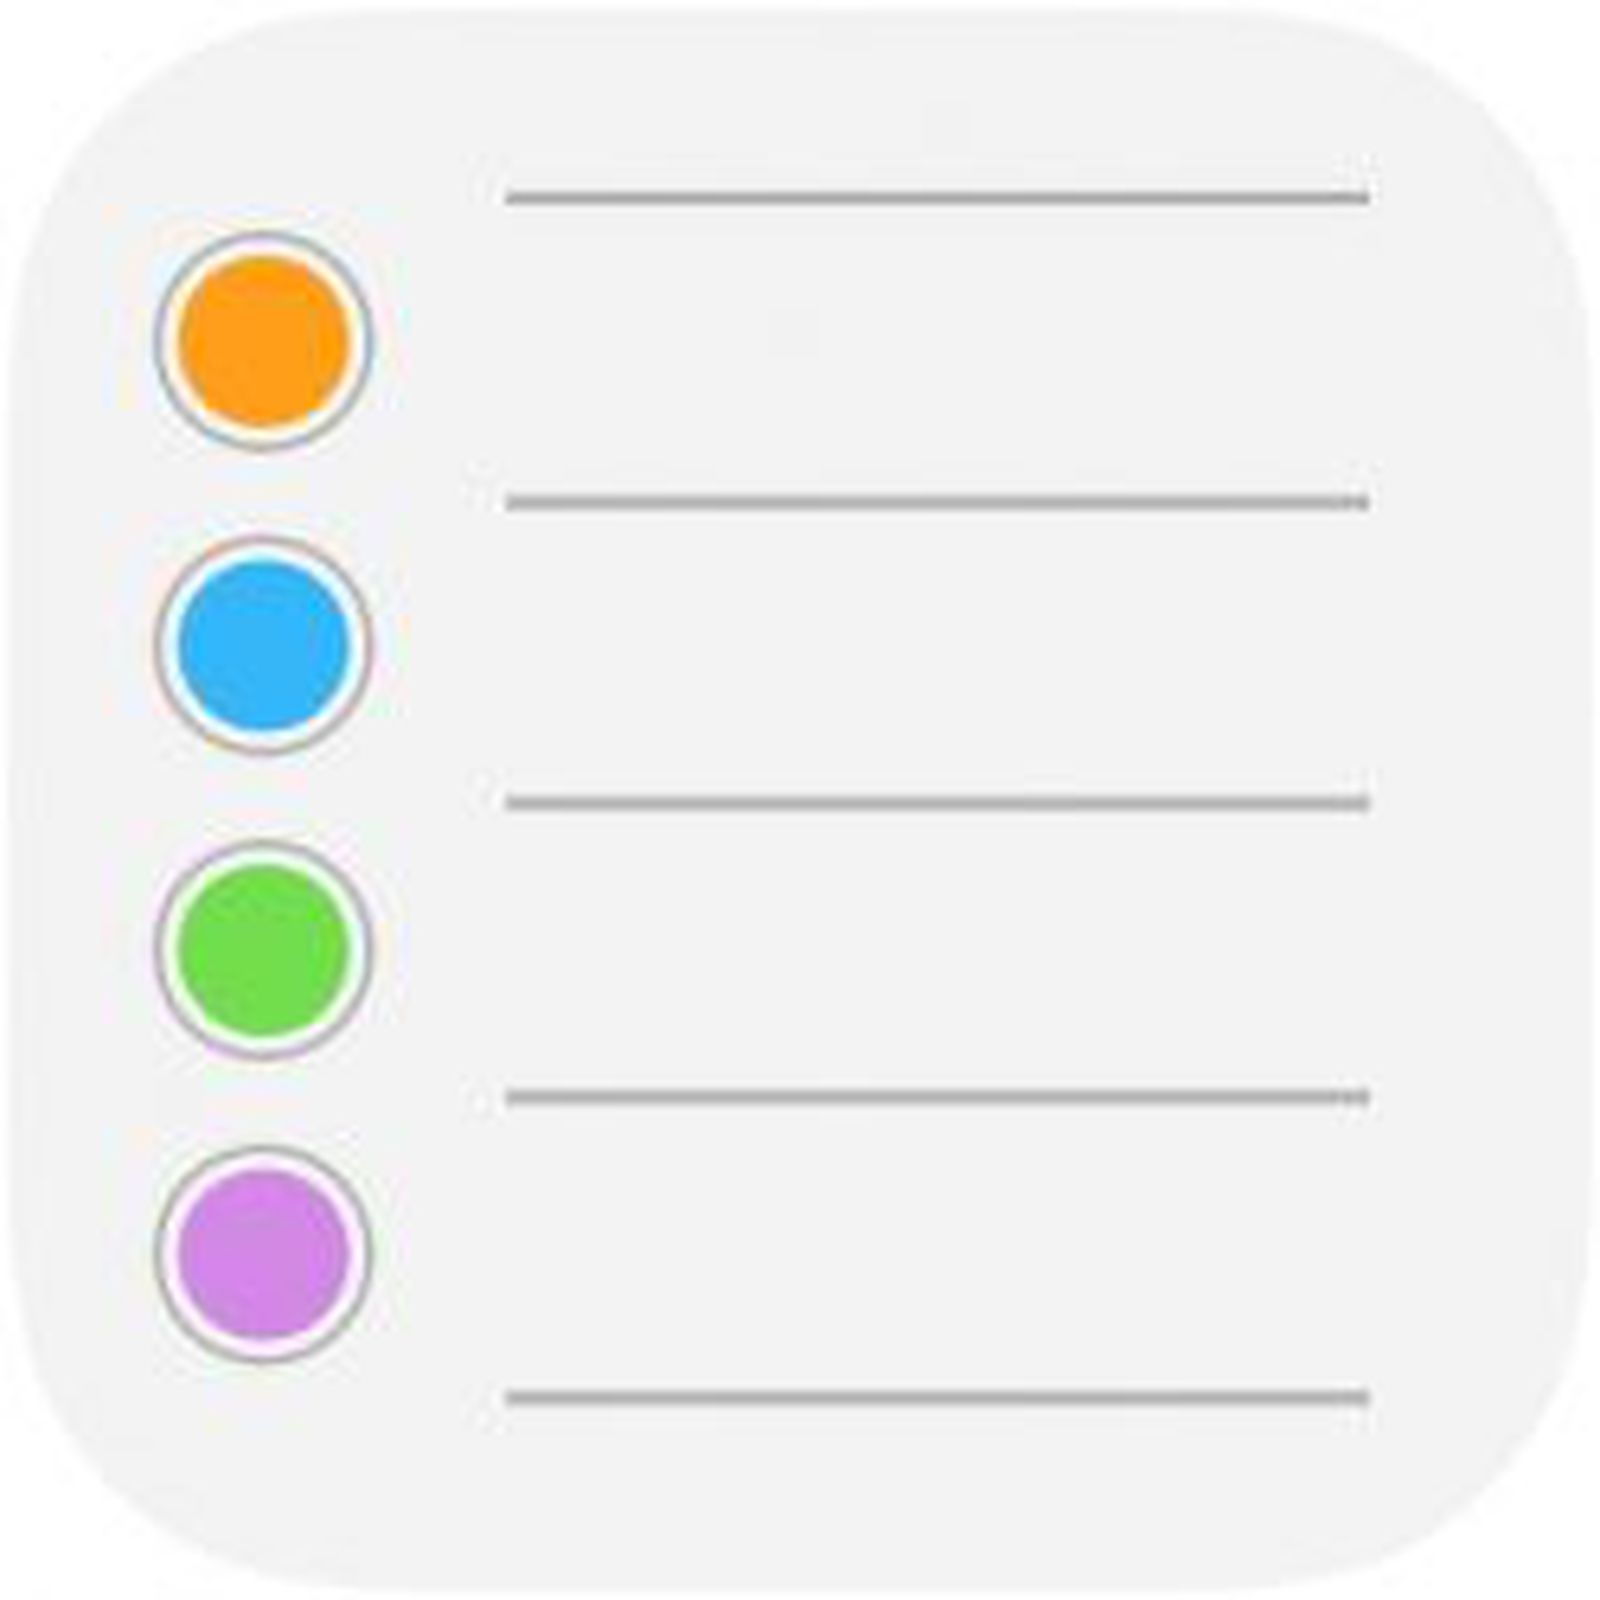 How to Customize the Look of Your Reminders Lists in iOS - MacRumors